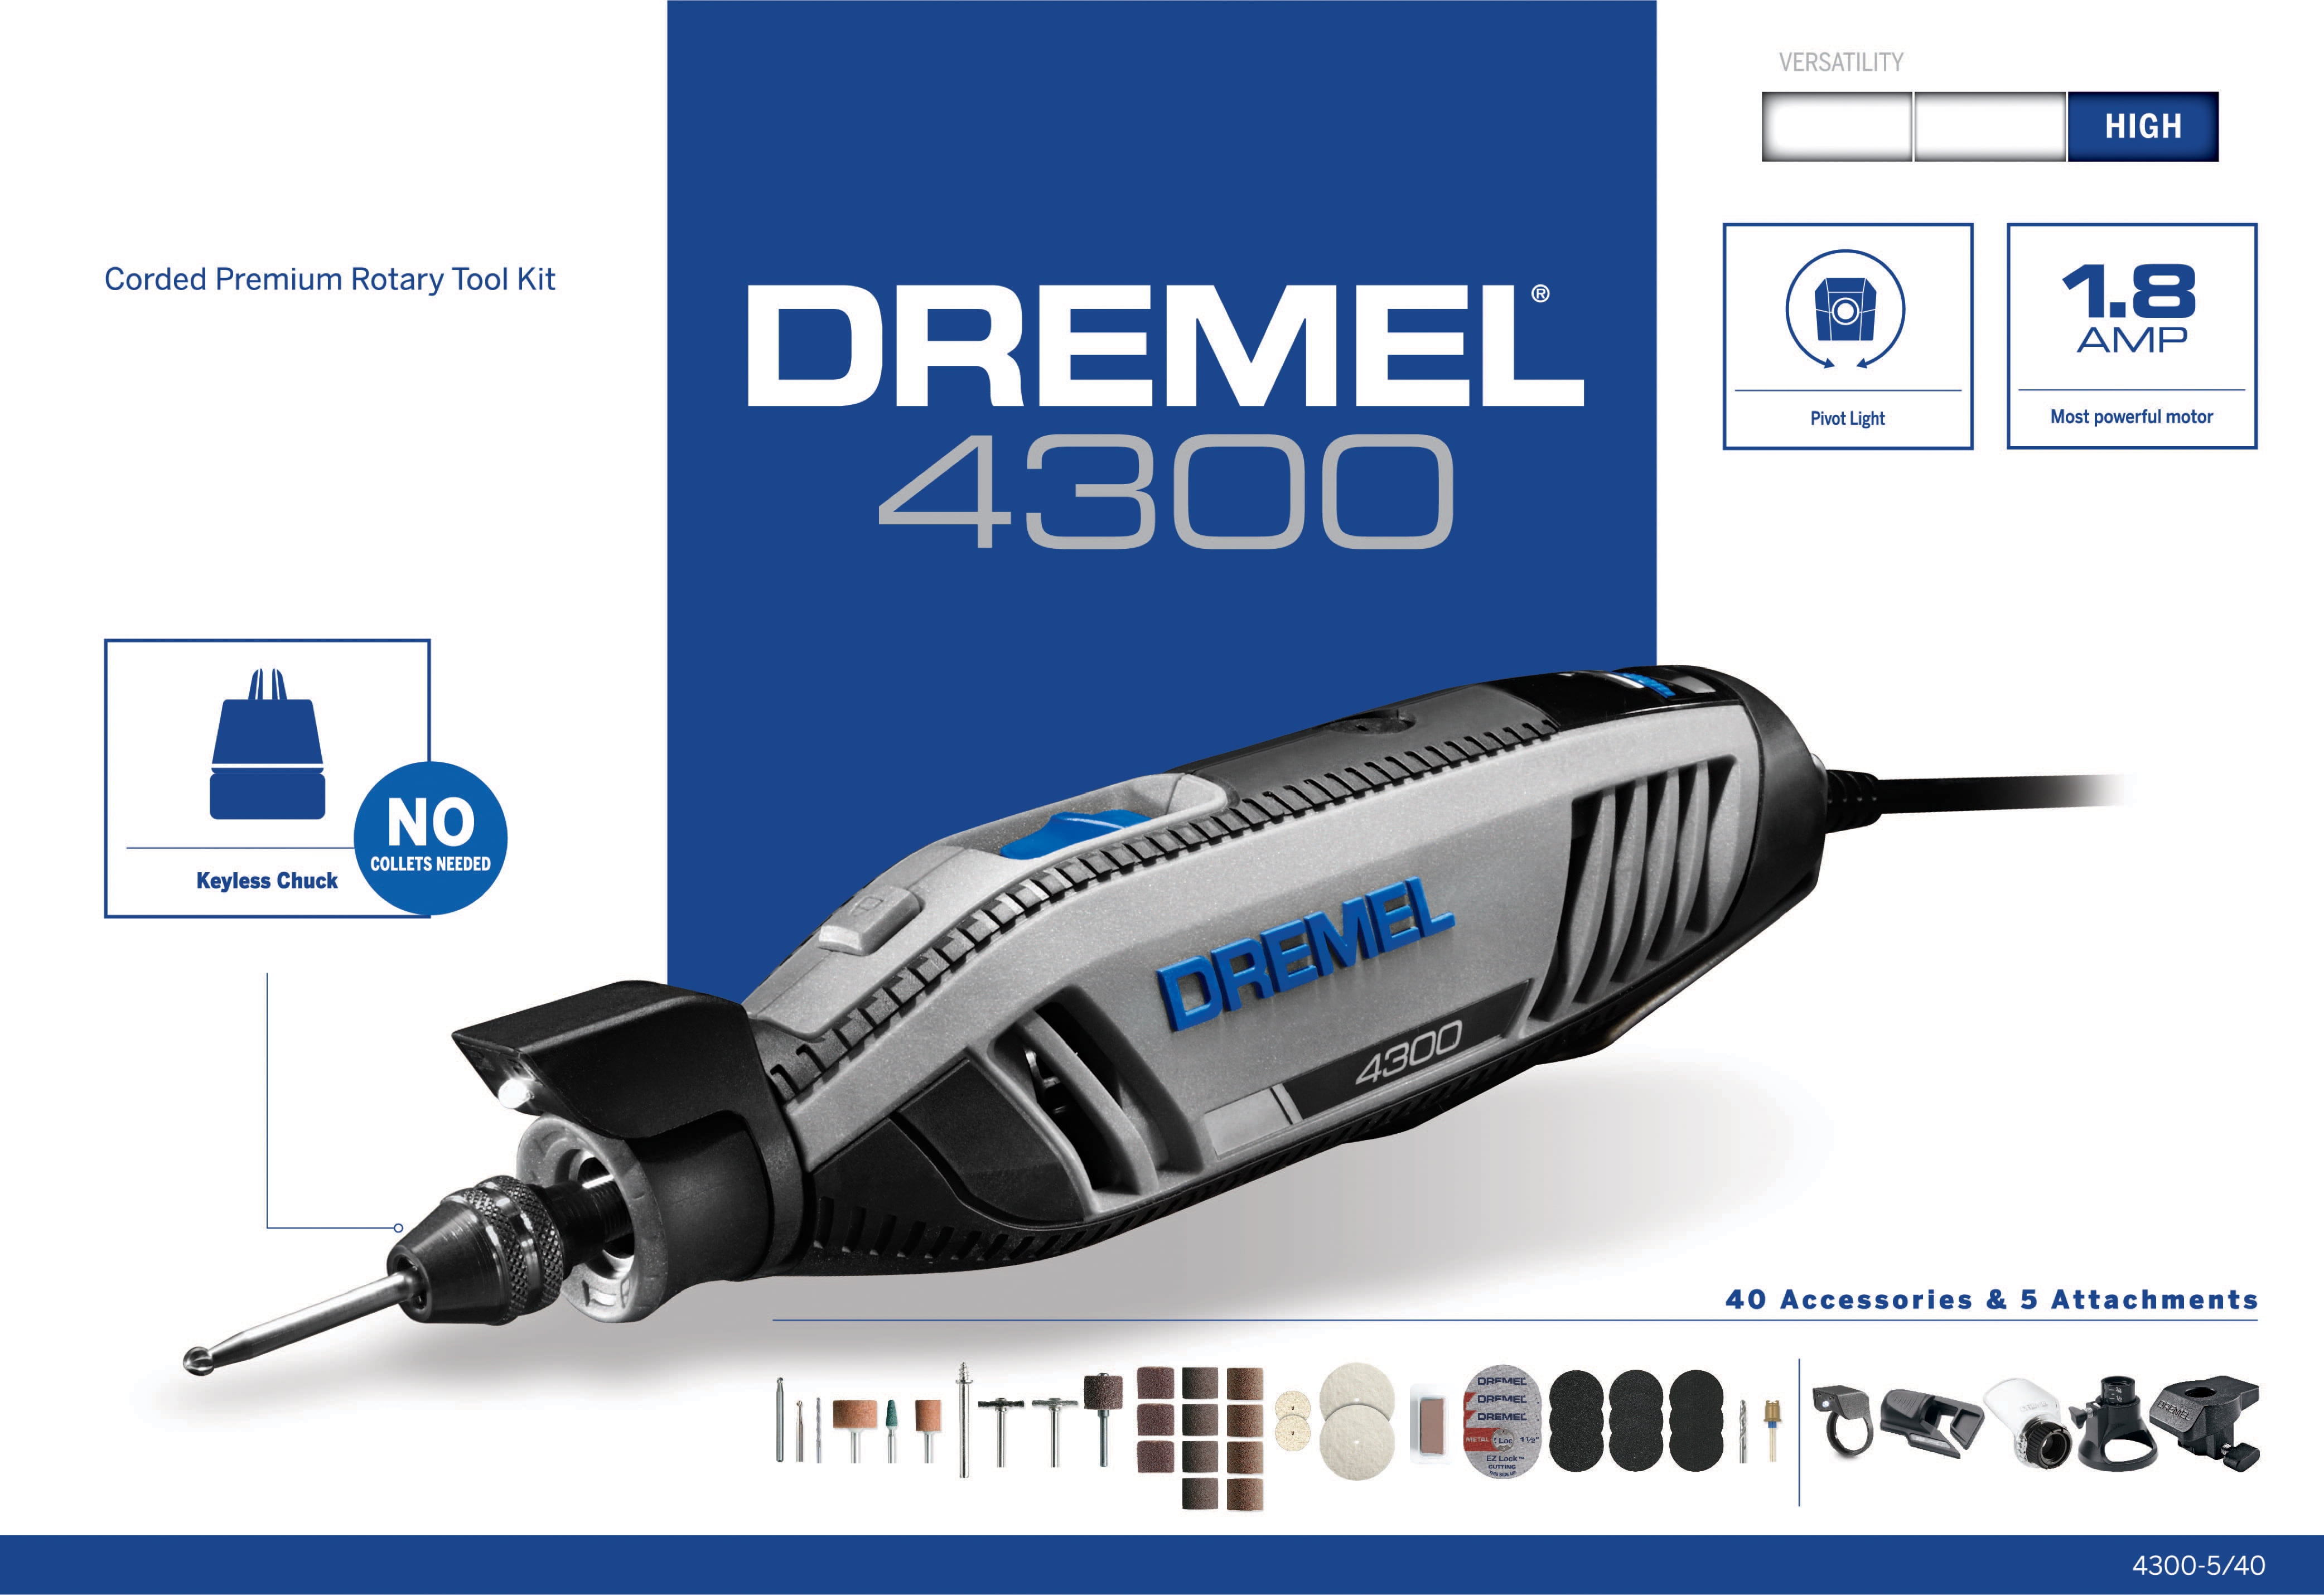 Dremel 4300-5/40 High Performance Rotary Tool Kit with LED Light- 5  Attachments & 40 Accessories- Engraver, Sander, and Polisher- Perfect for  Grinding, Cutting, Wood Carving, Sanding, and Engraving 